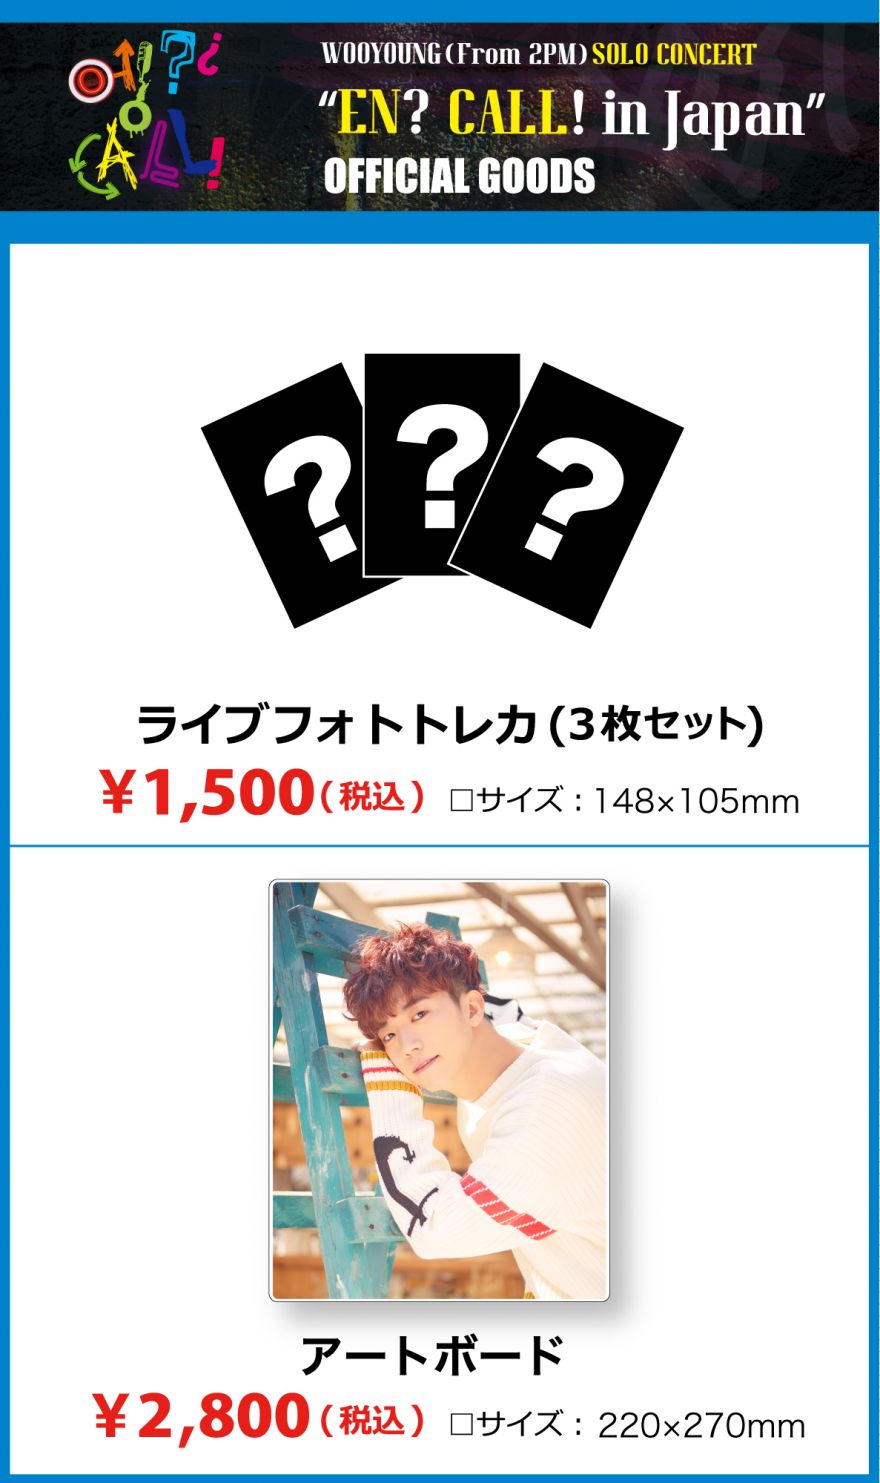 WOOYOUNG （From 2PM） SOLO CONCERT “EN? CALL! in Japan” Sony Music